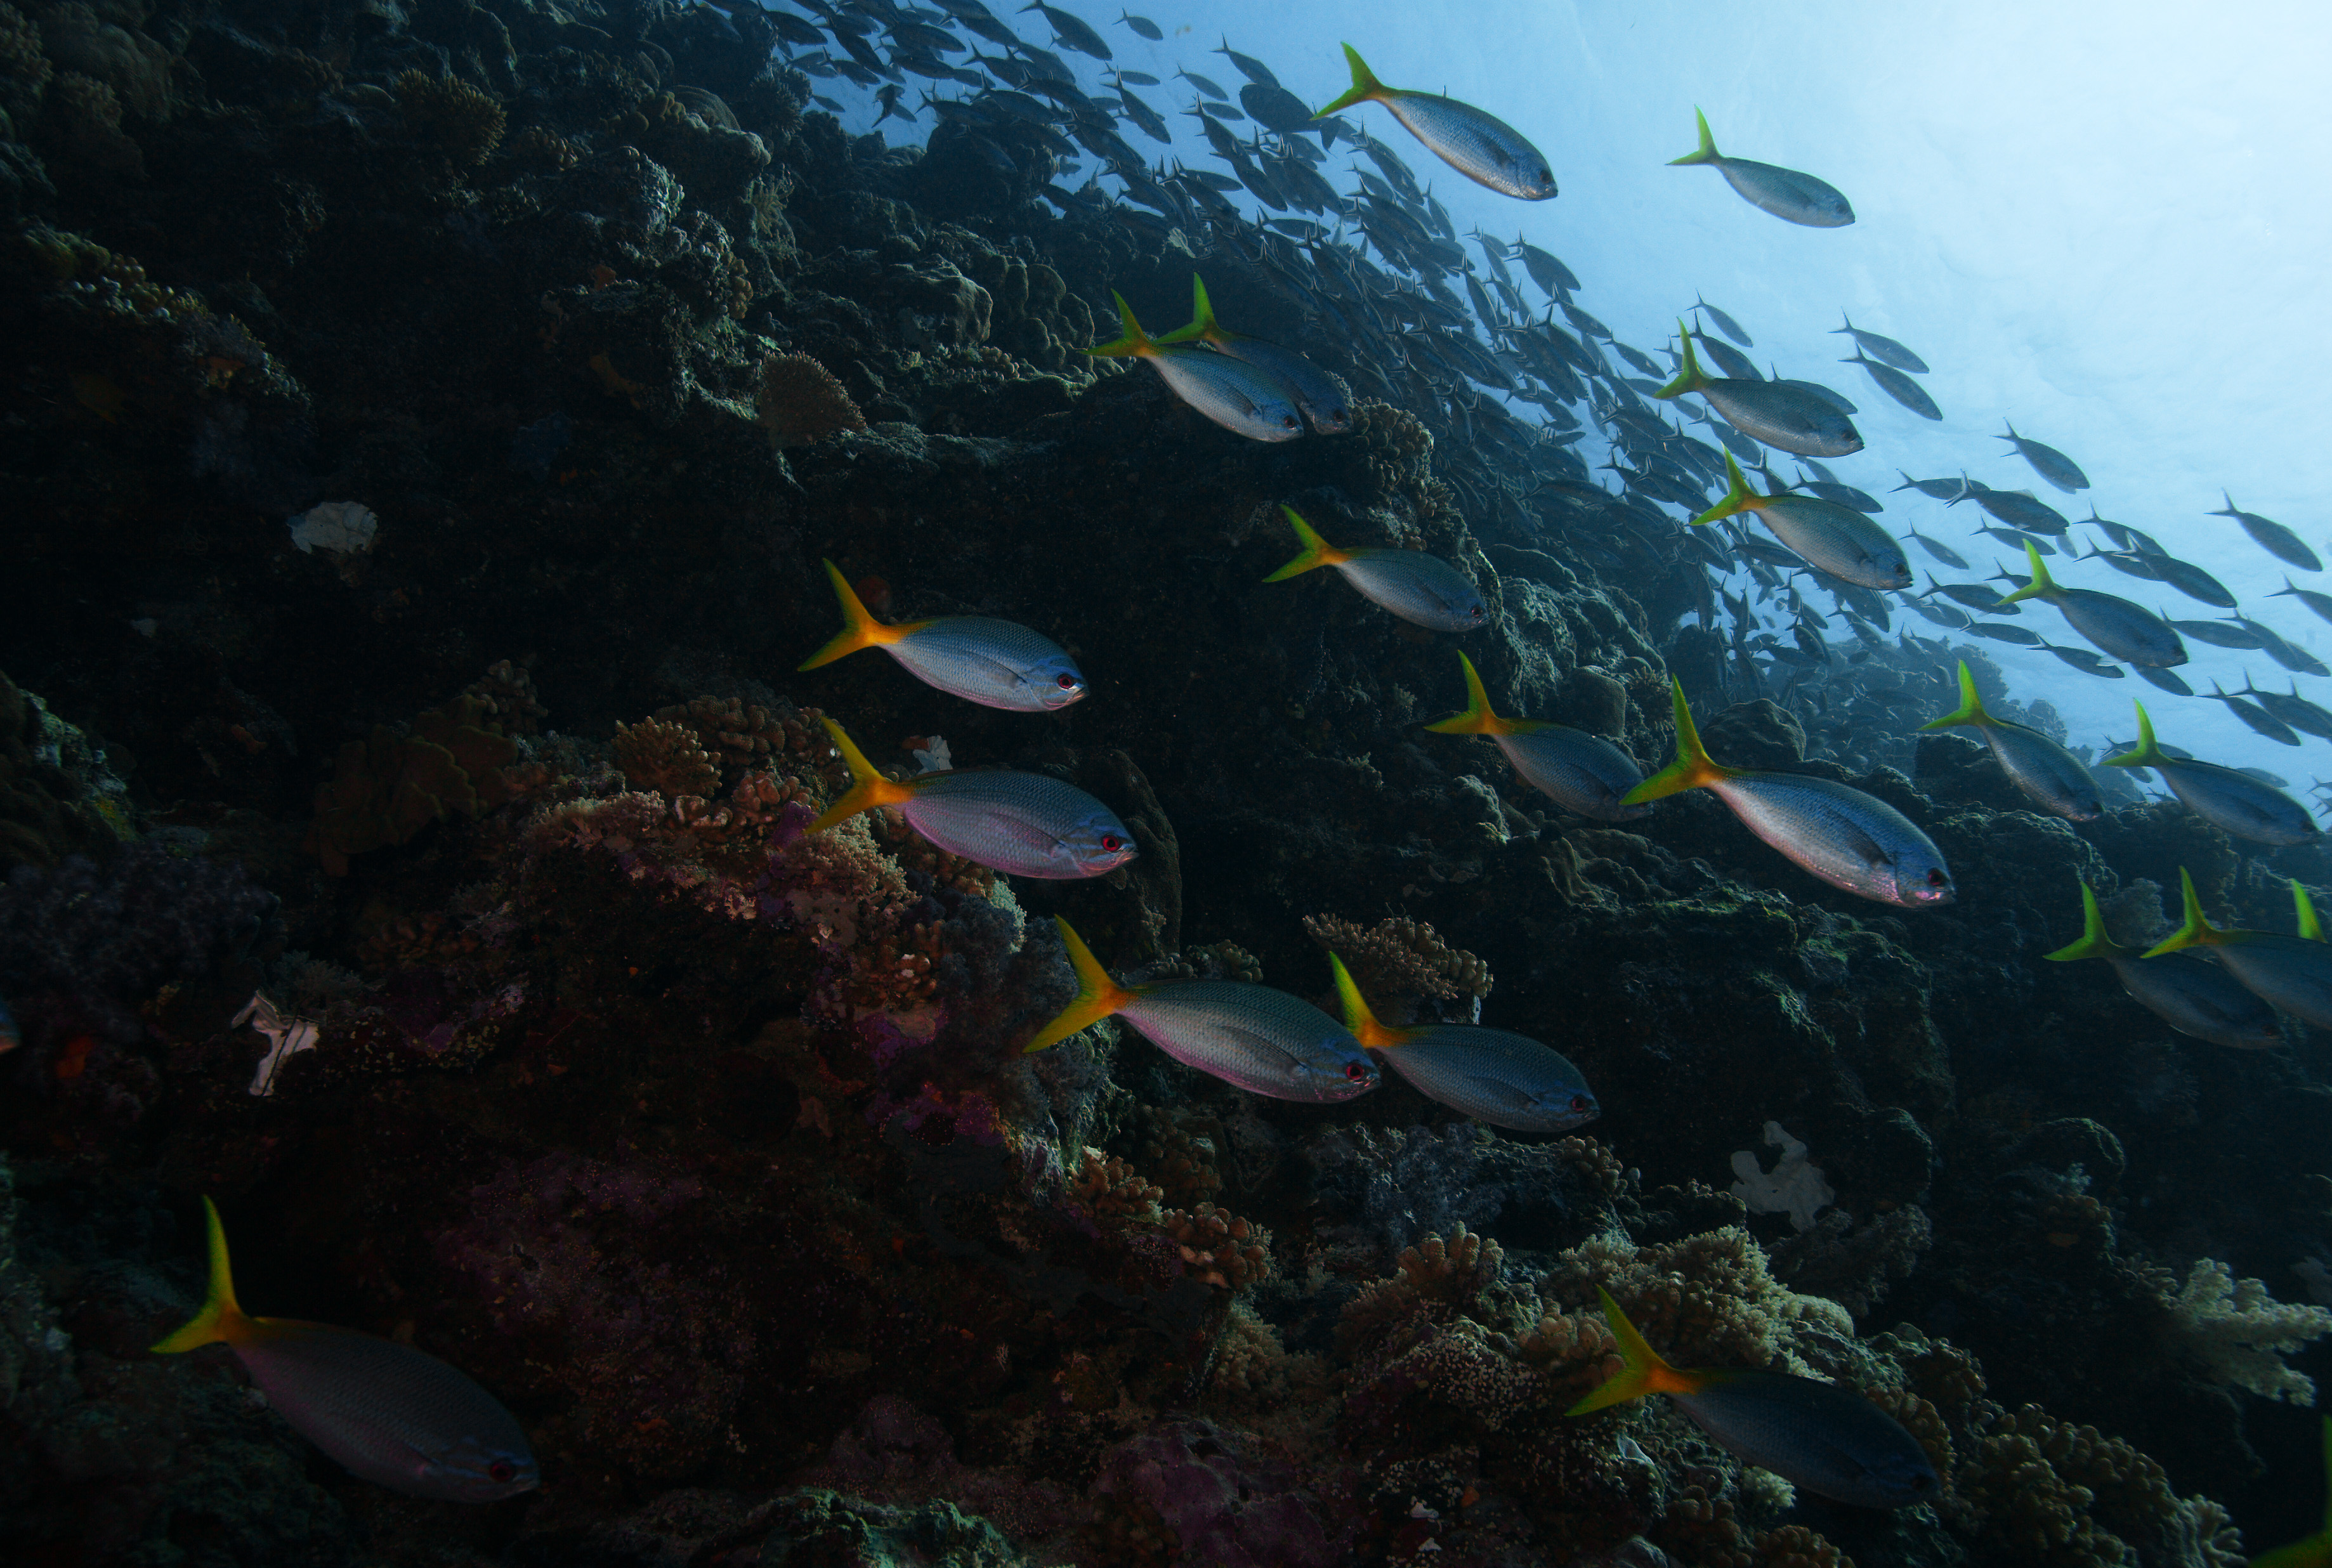 photo,material,free,landscape,picture,stock photo,Creative Commons,A school of fish, The sea, Coral, , School of fish